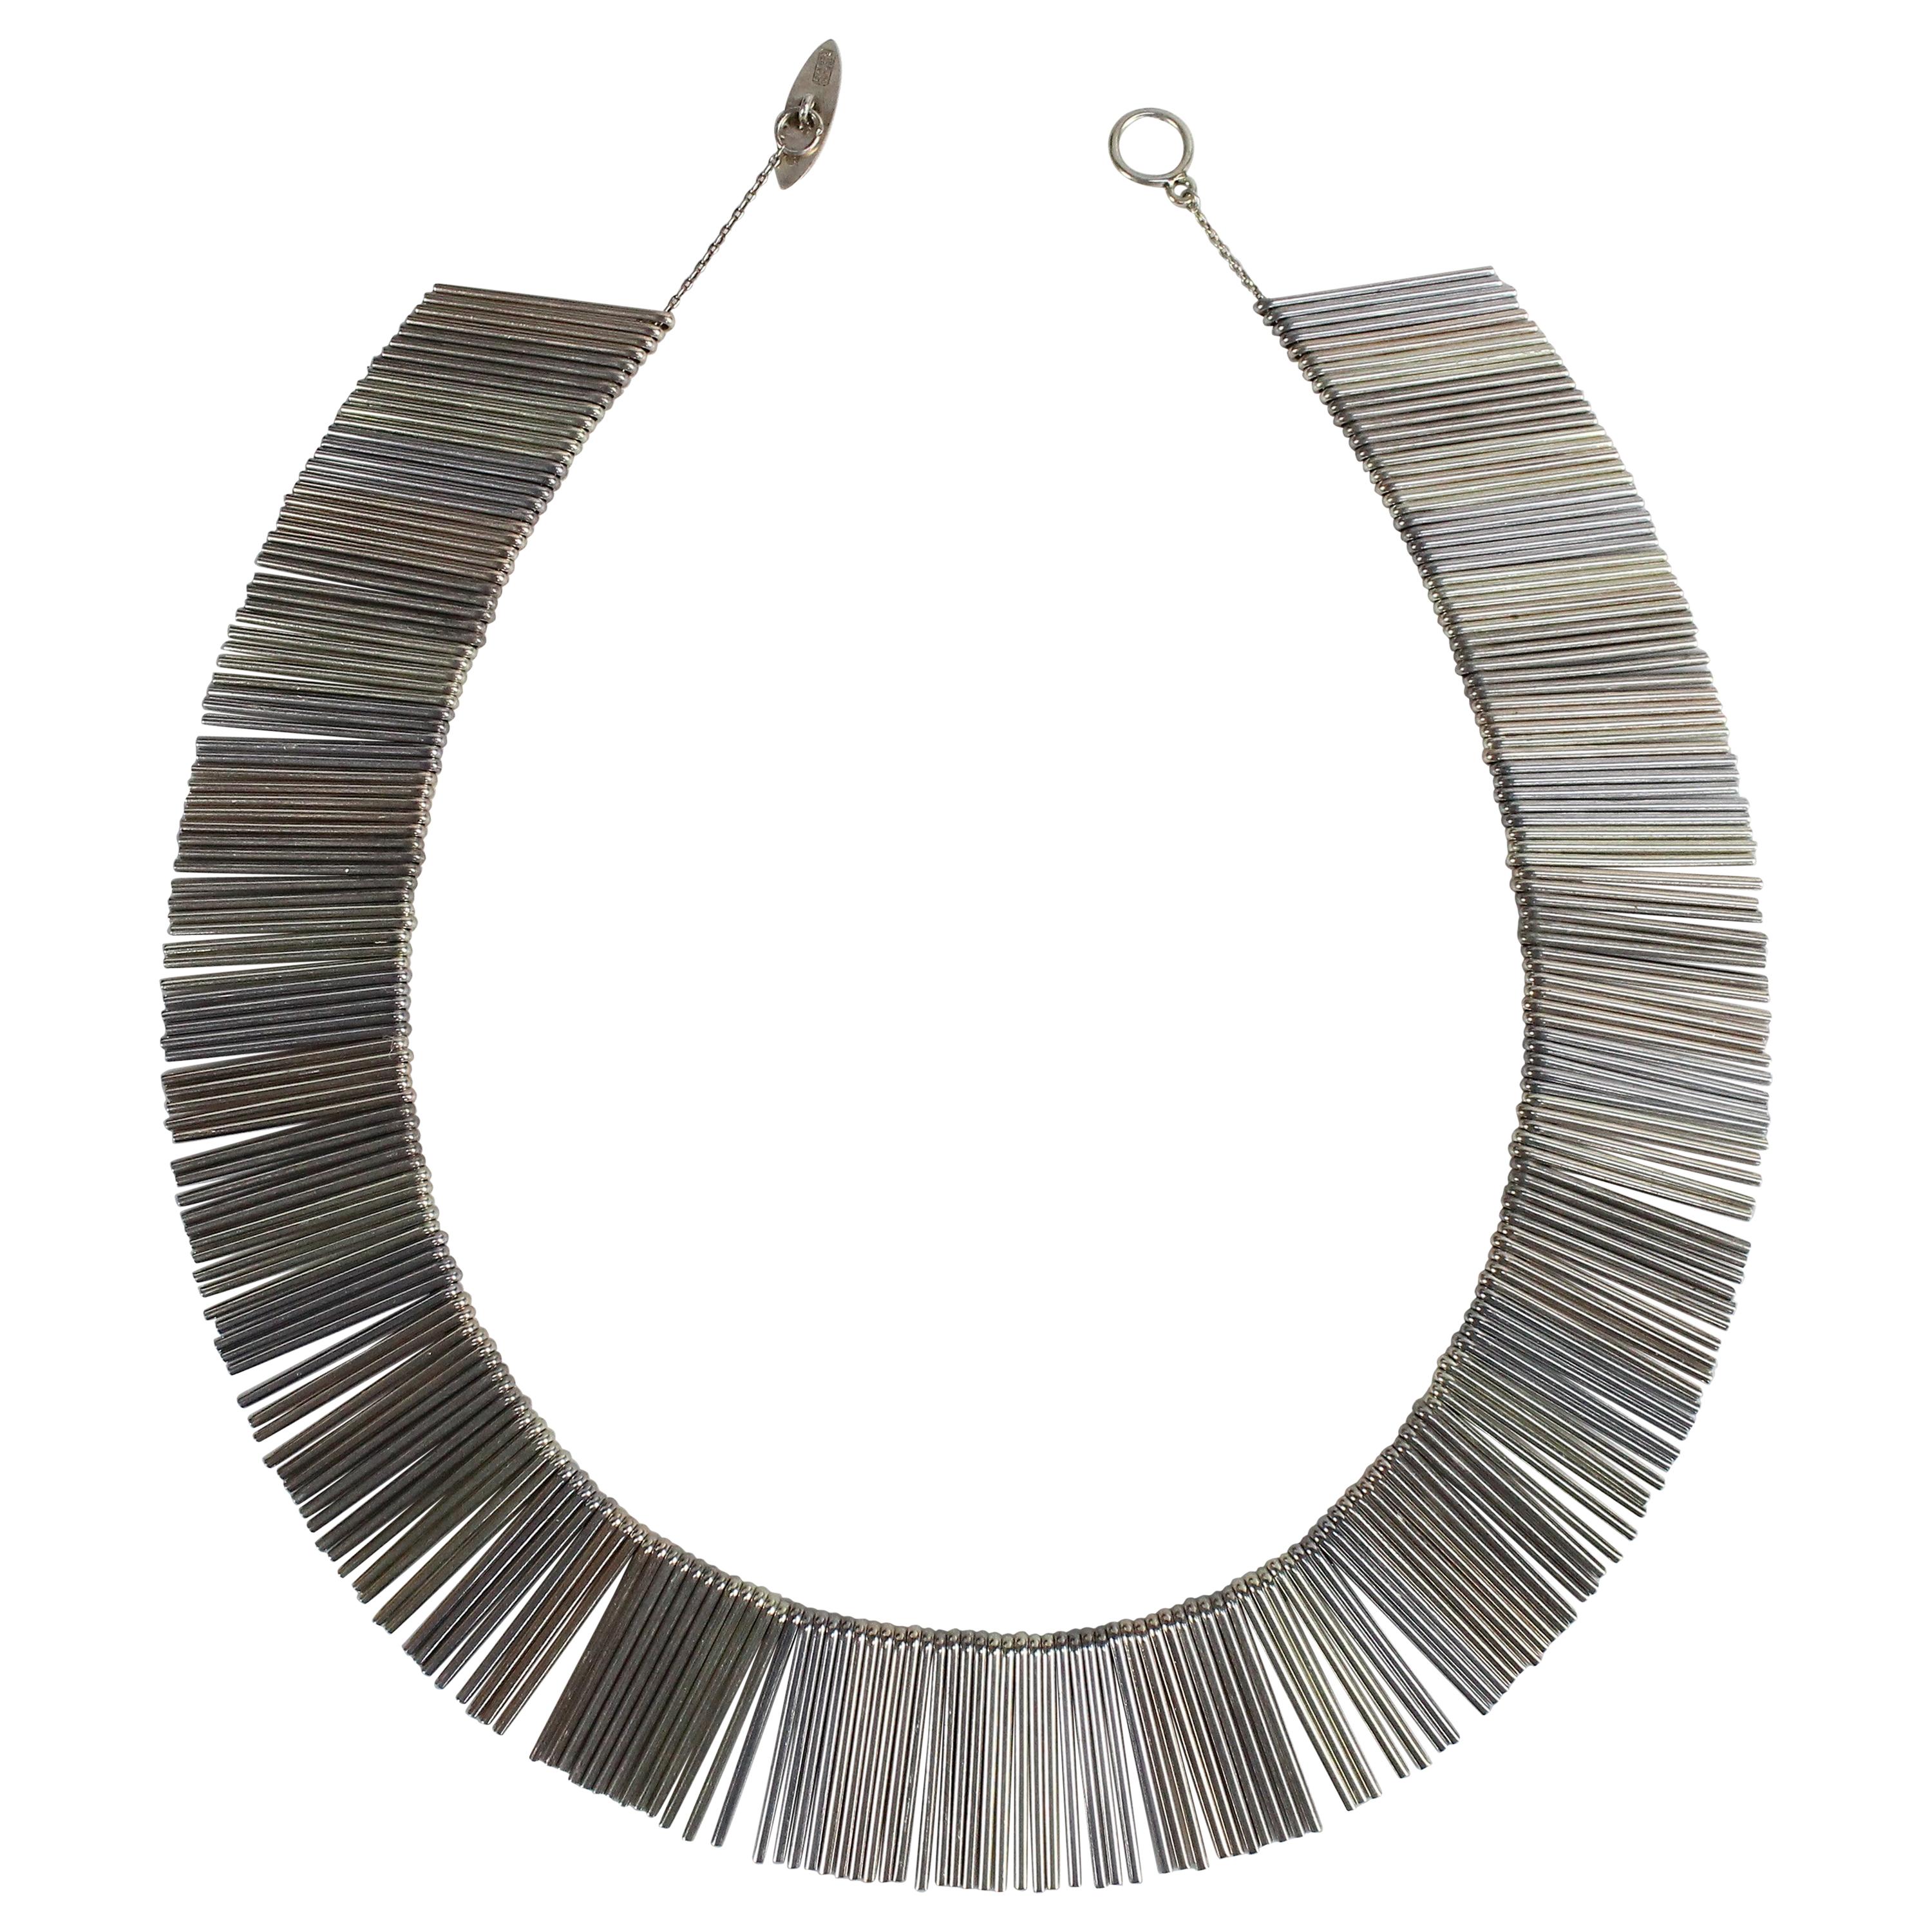 A. Michelsen, Scandinavian Modern Necklace, Three Colored Sterling Silver